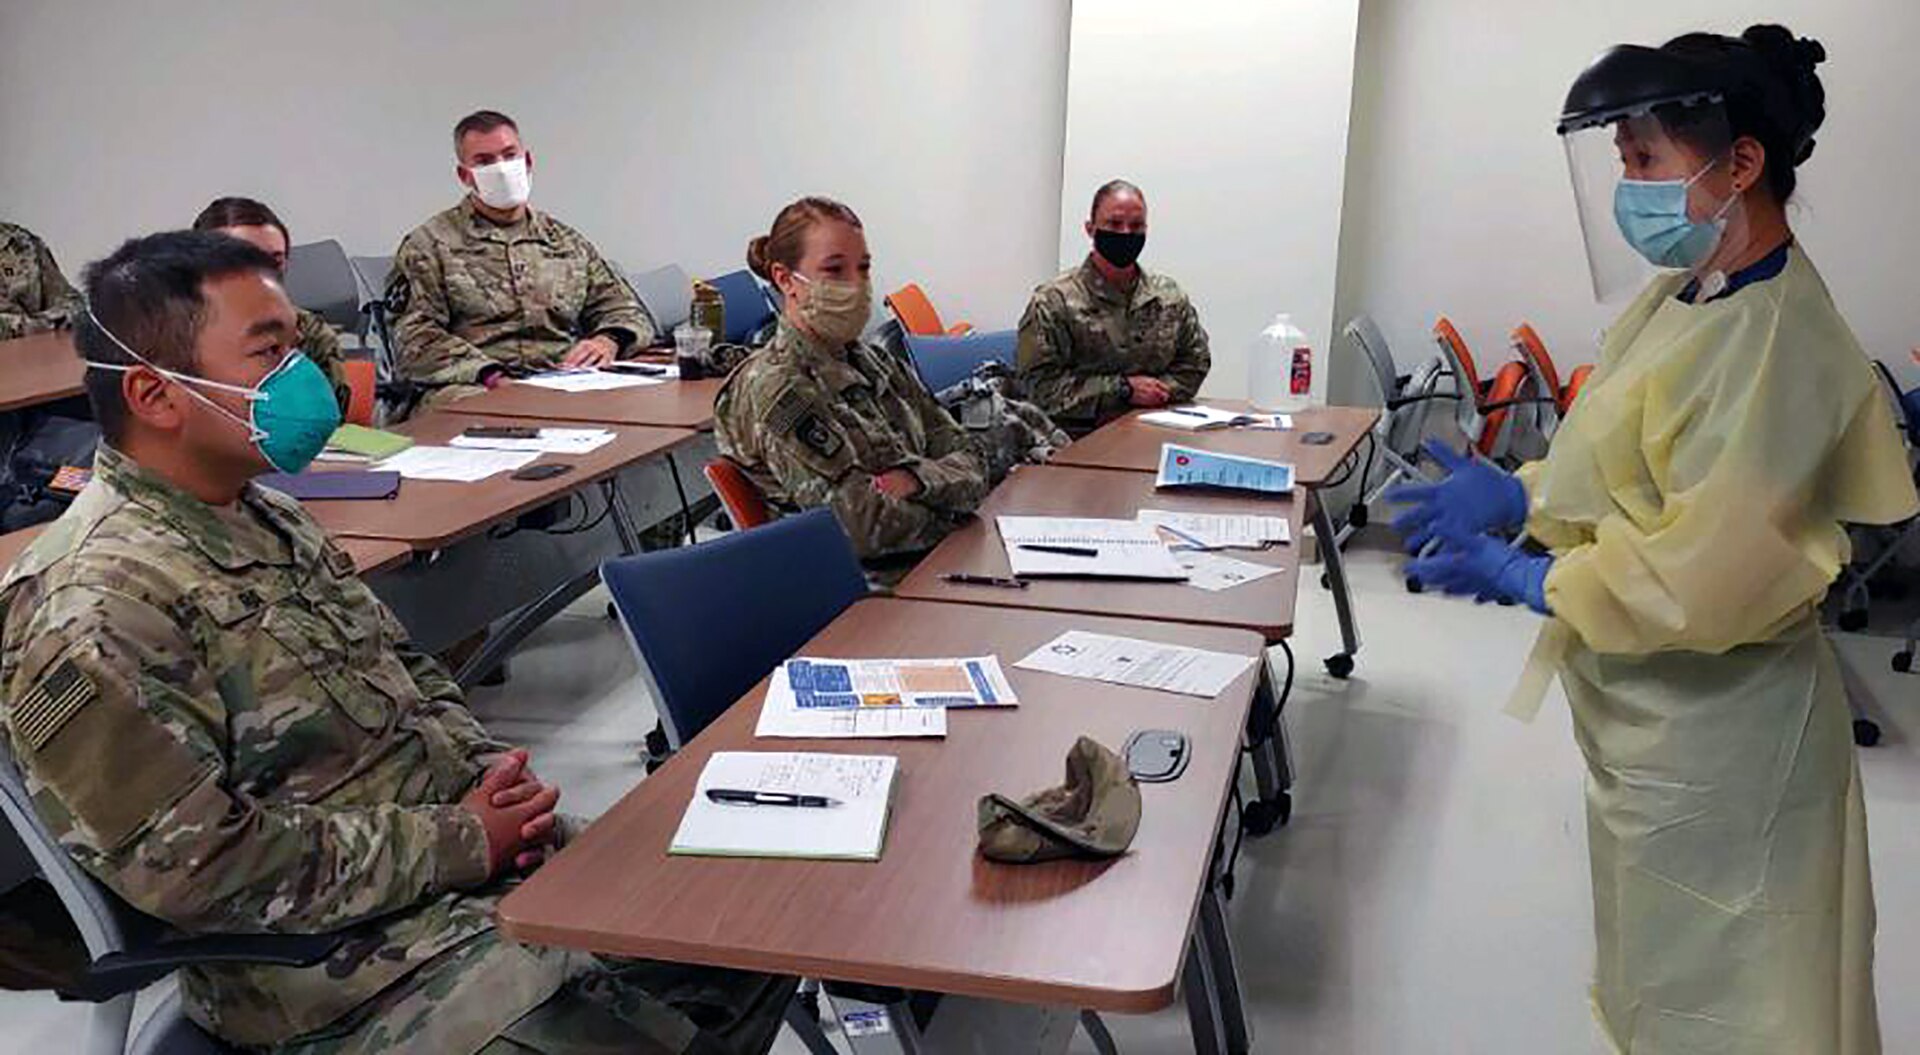 University Hospital integration trainer and Registered Nurse Helena Quezon shows the wear, removal and disposal of personal protective equipment during integration training to Urban Augmentation Medical Task Force-627 Soldiers at University Hospital in San Antonio July 8.